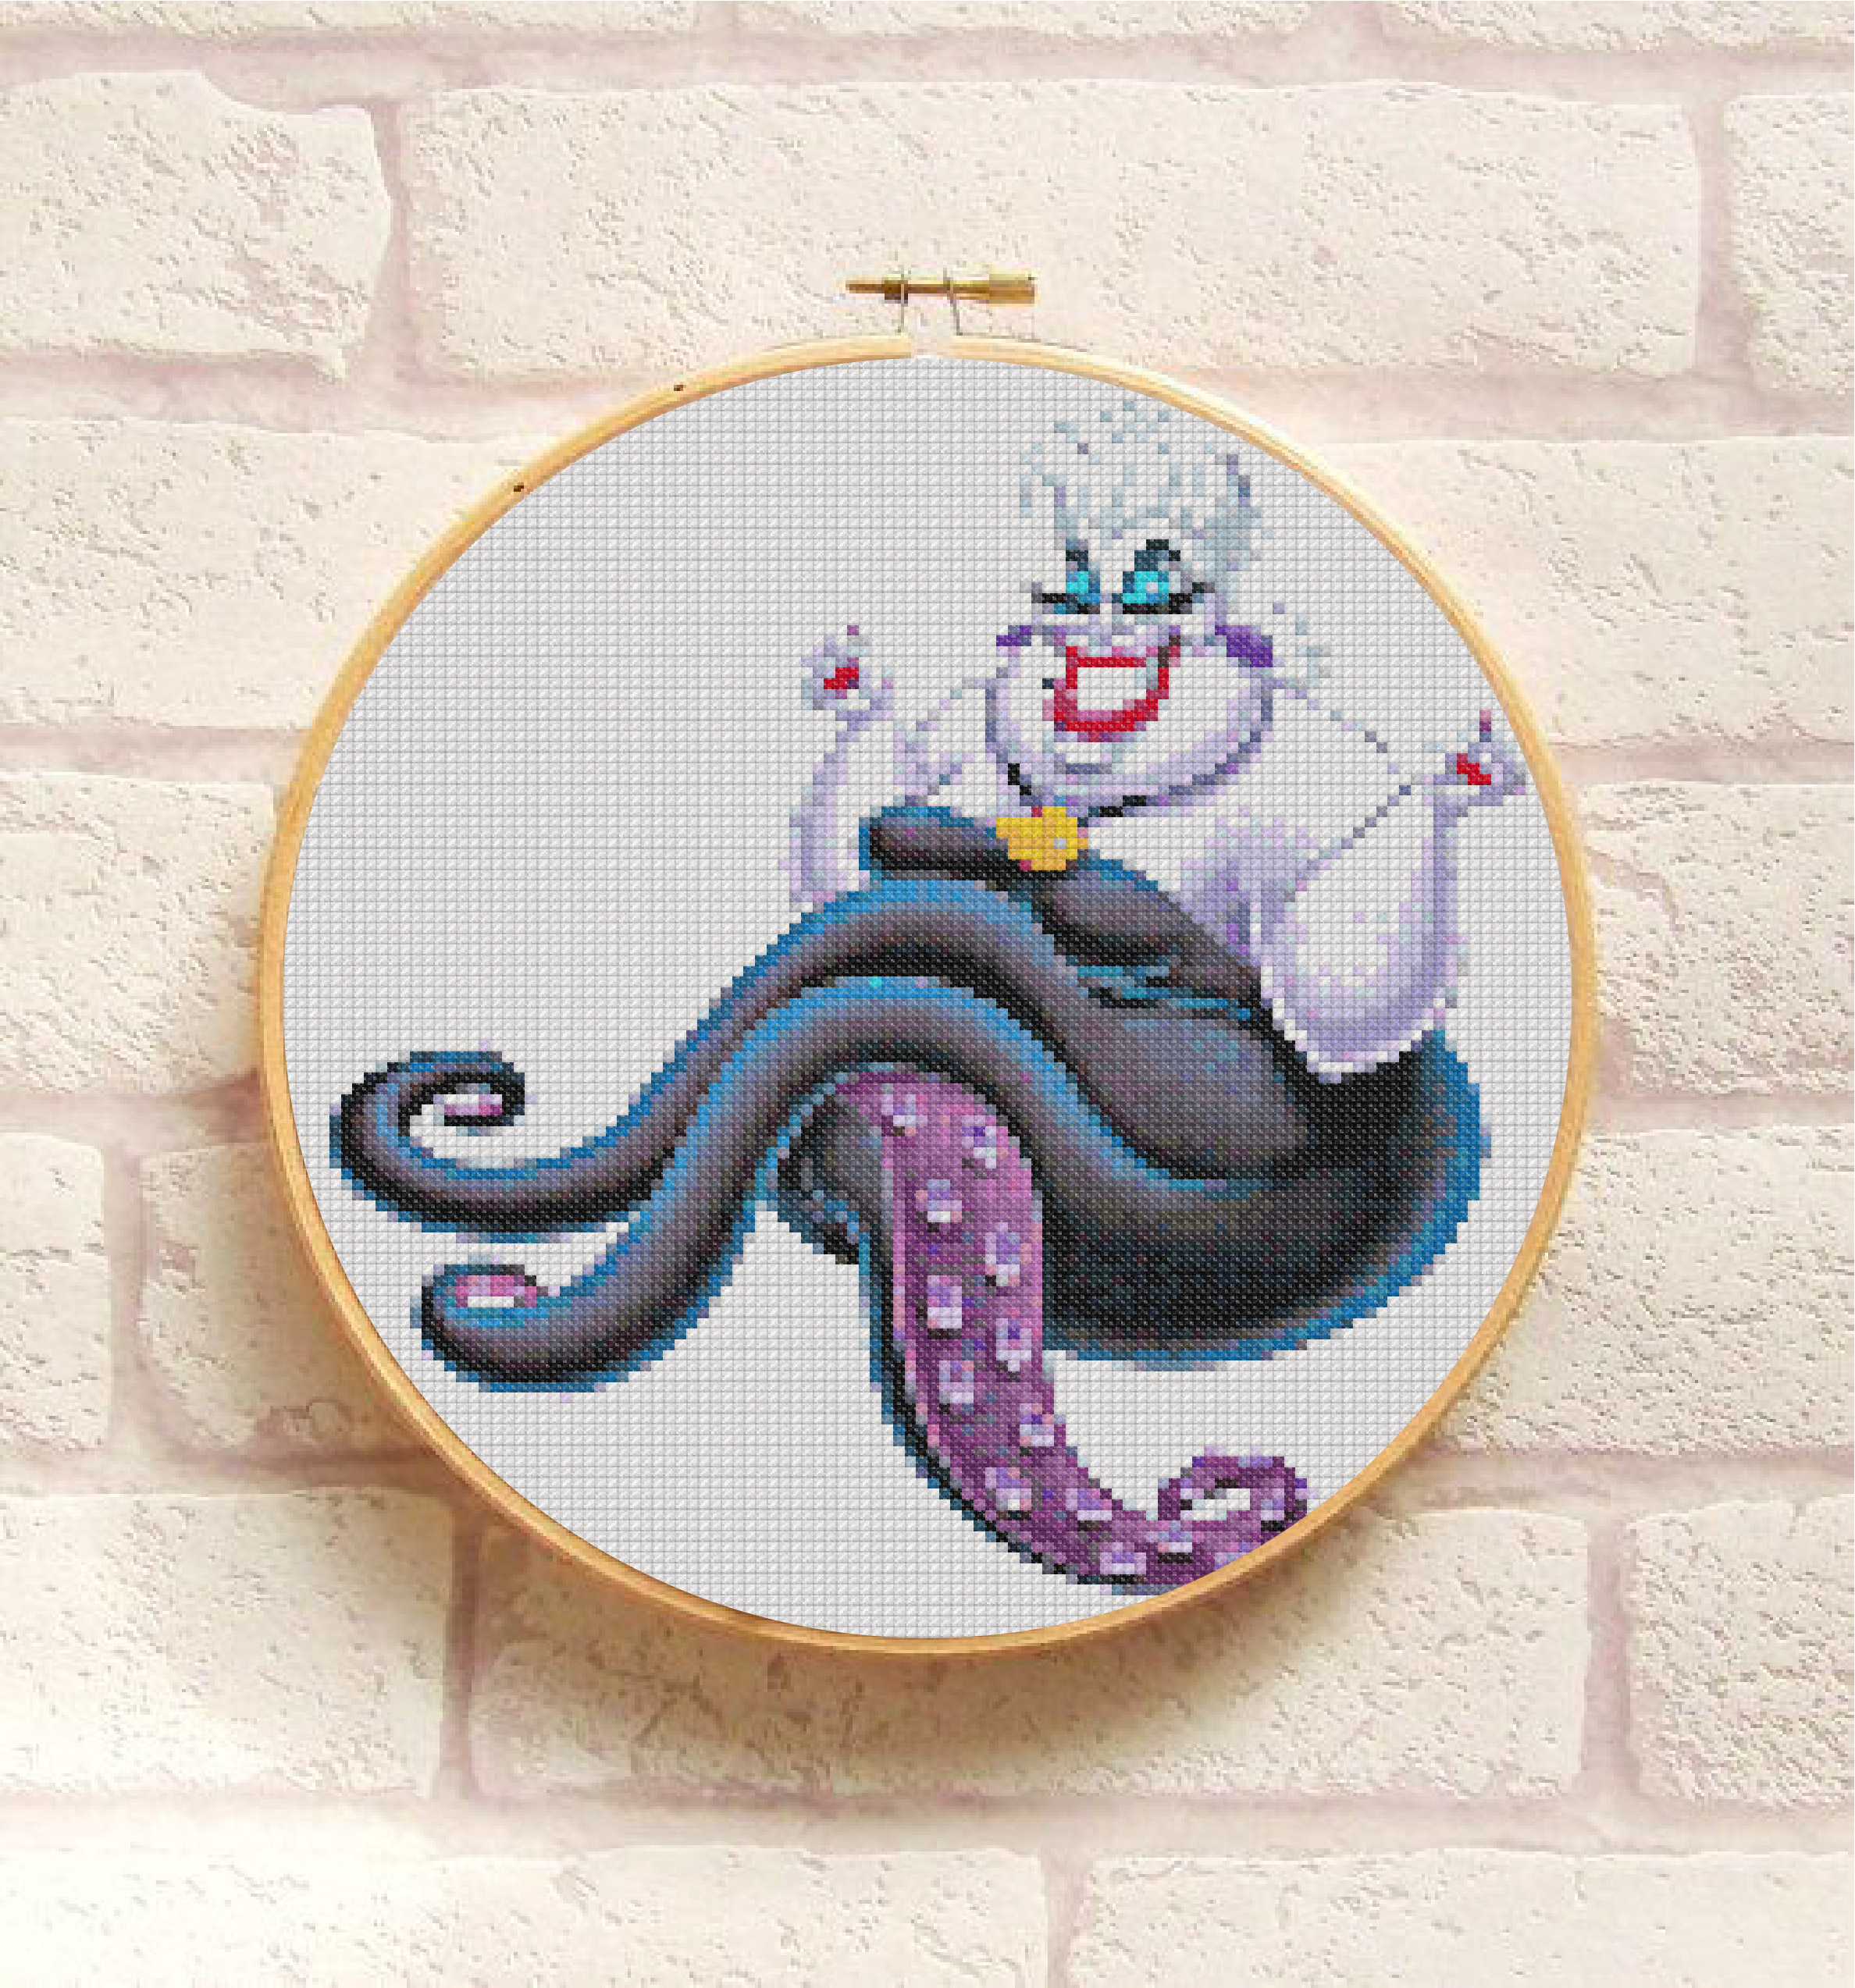 Embroidery Cross Stitch Patterns Ursula Cross Stitch Pattern Pdf Embroidery Chart Nursery Decor Disney Little Mermaid Witch Counted Cross Stitch Chart Instant Download